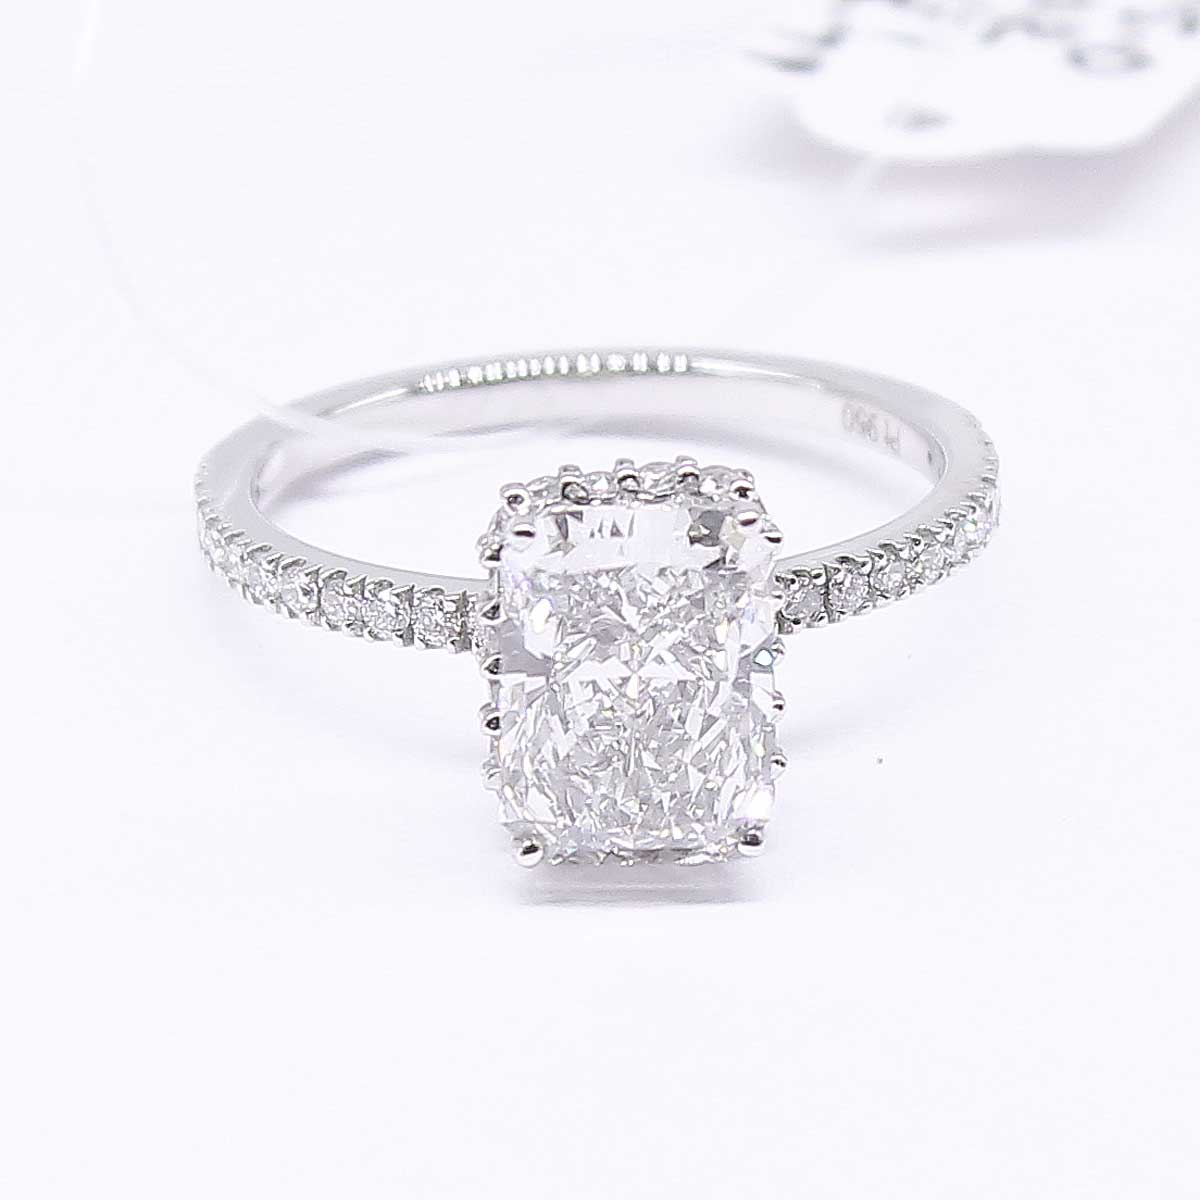 6ct Radiant Halo Engagement Ring Custom by Ascot Diamods | Radiant cut  diamond engagement rings, Radiant cut diamond engagement, Radiant cut  engagement rings